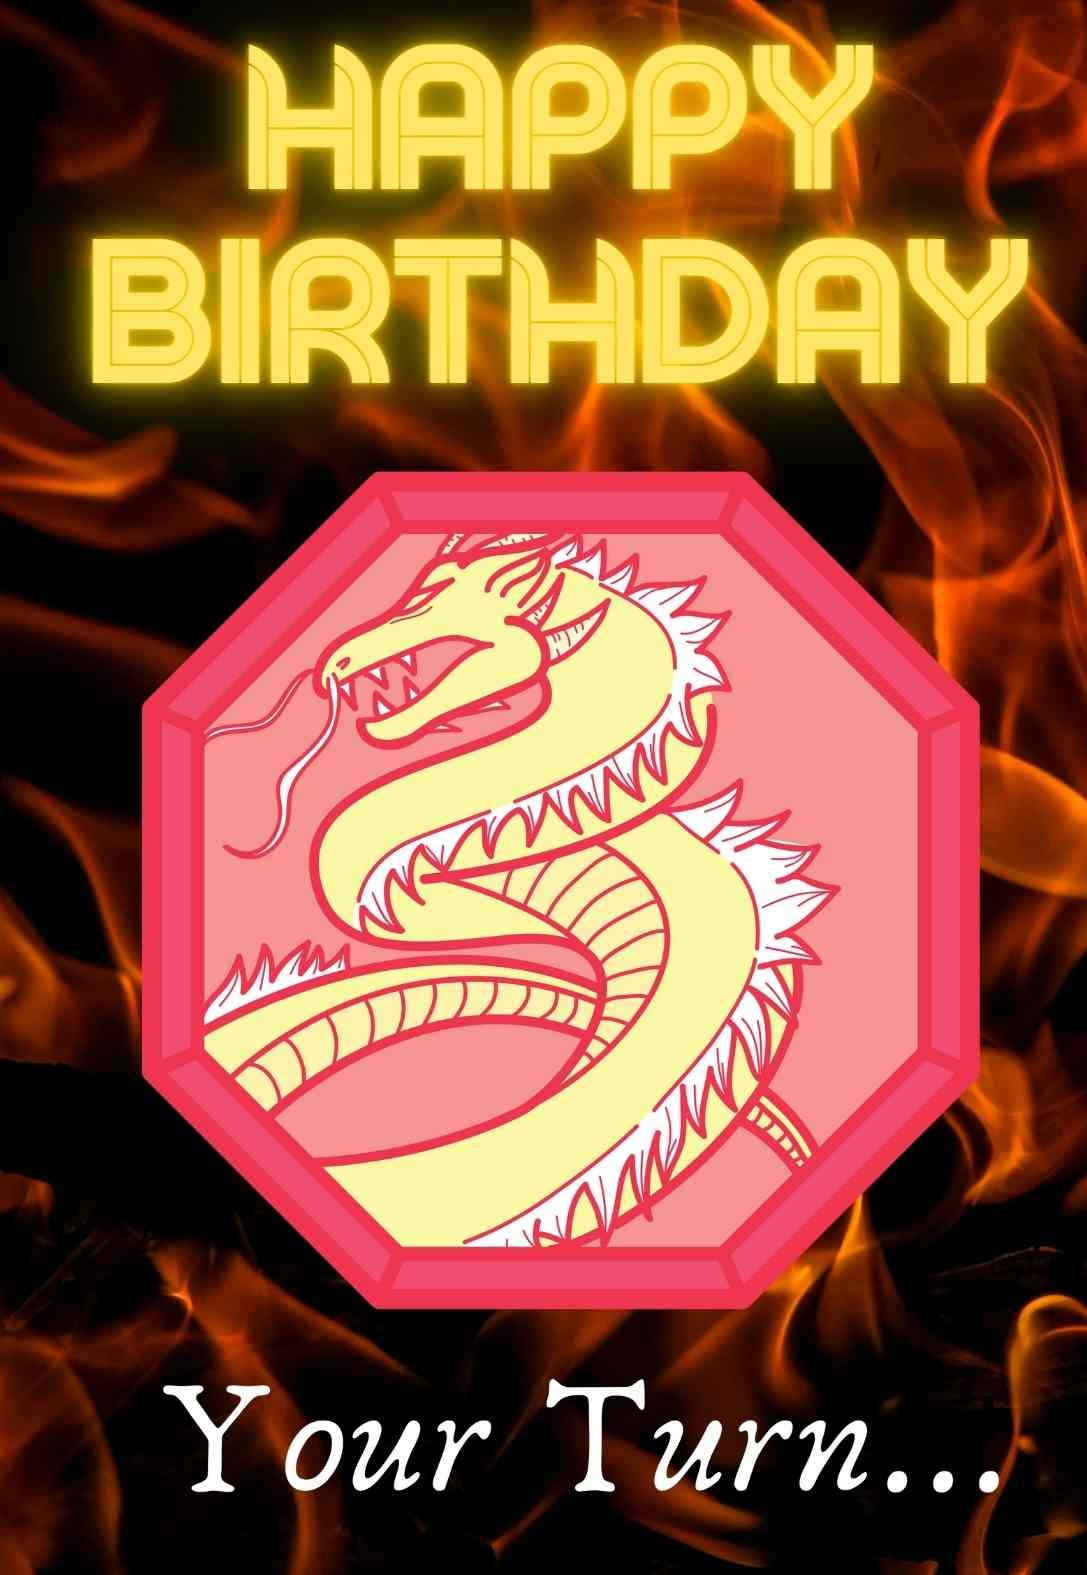 dungeons-and-dragons-printable-birthday-cards-printbirthday-cards